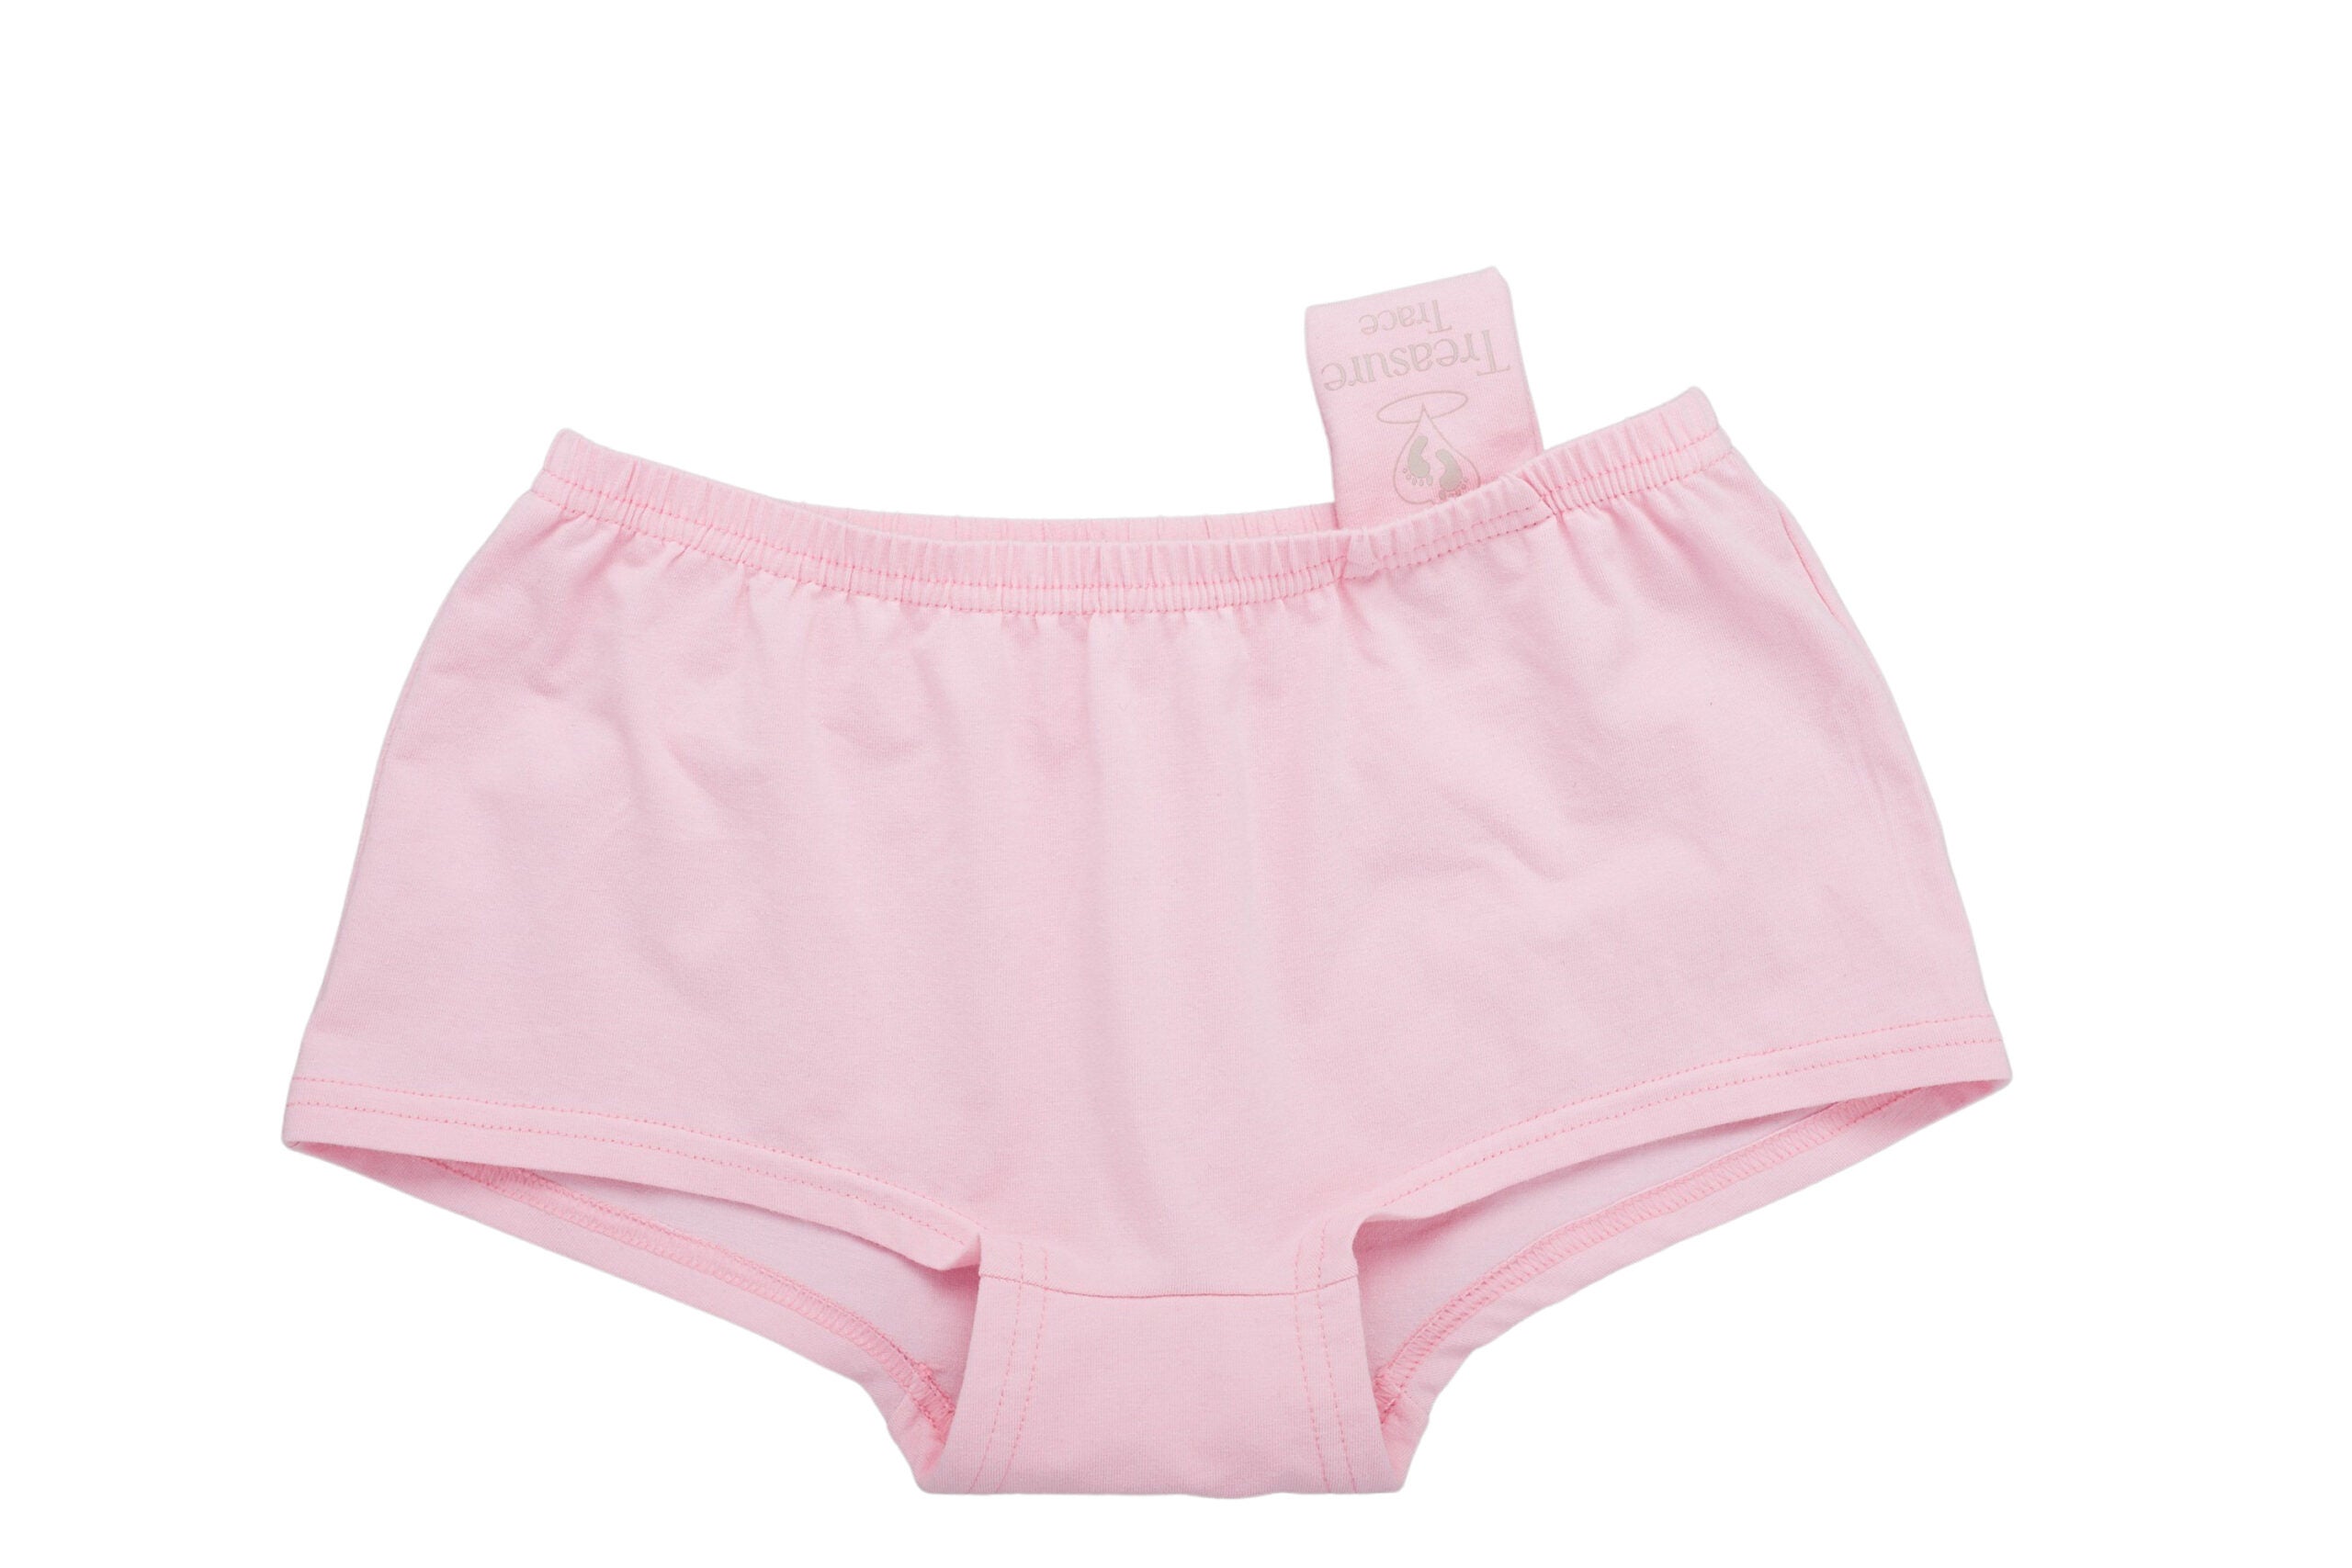 This tracking underwear for kids lets you always know where your child is